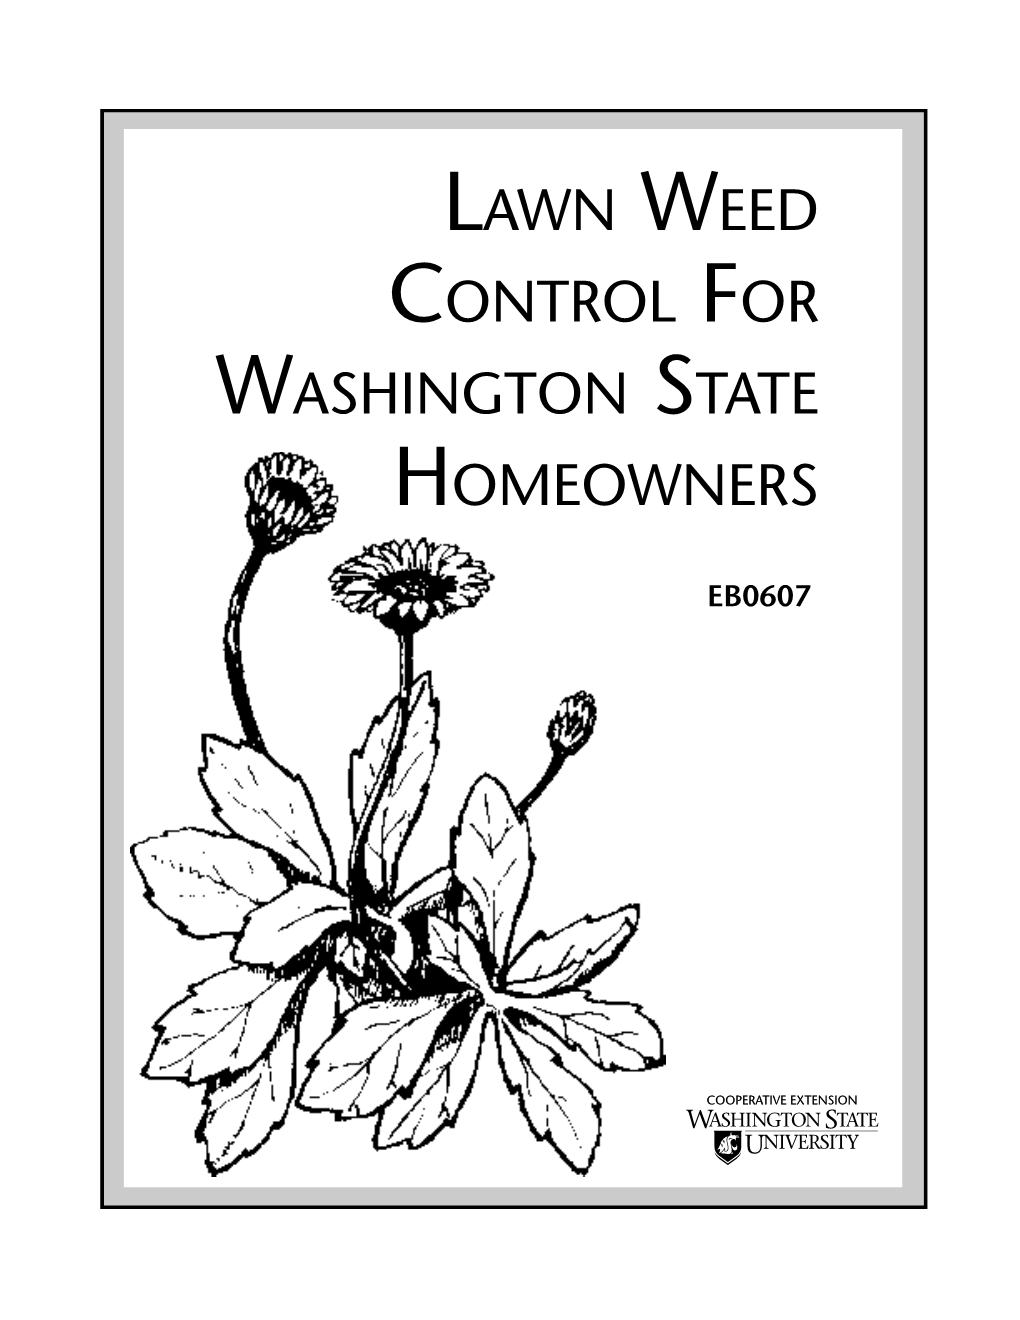 EB0607: Lawn Weed Control for Washington State Homeowners